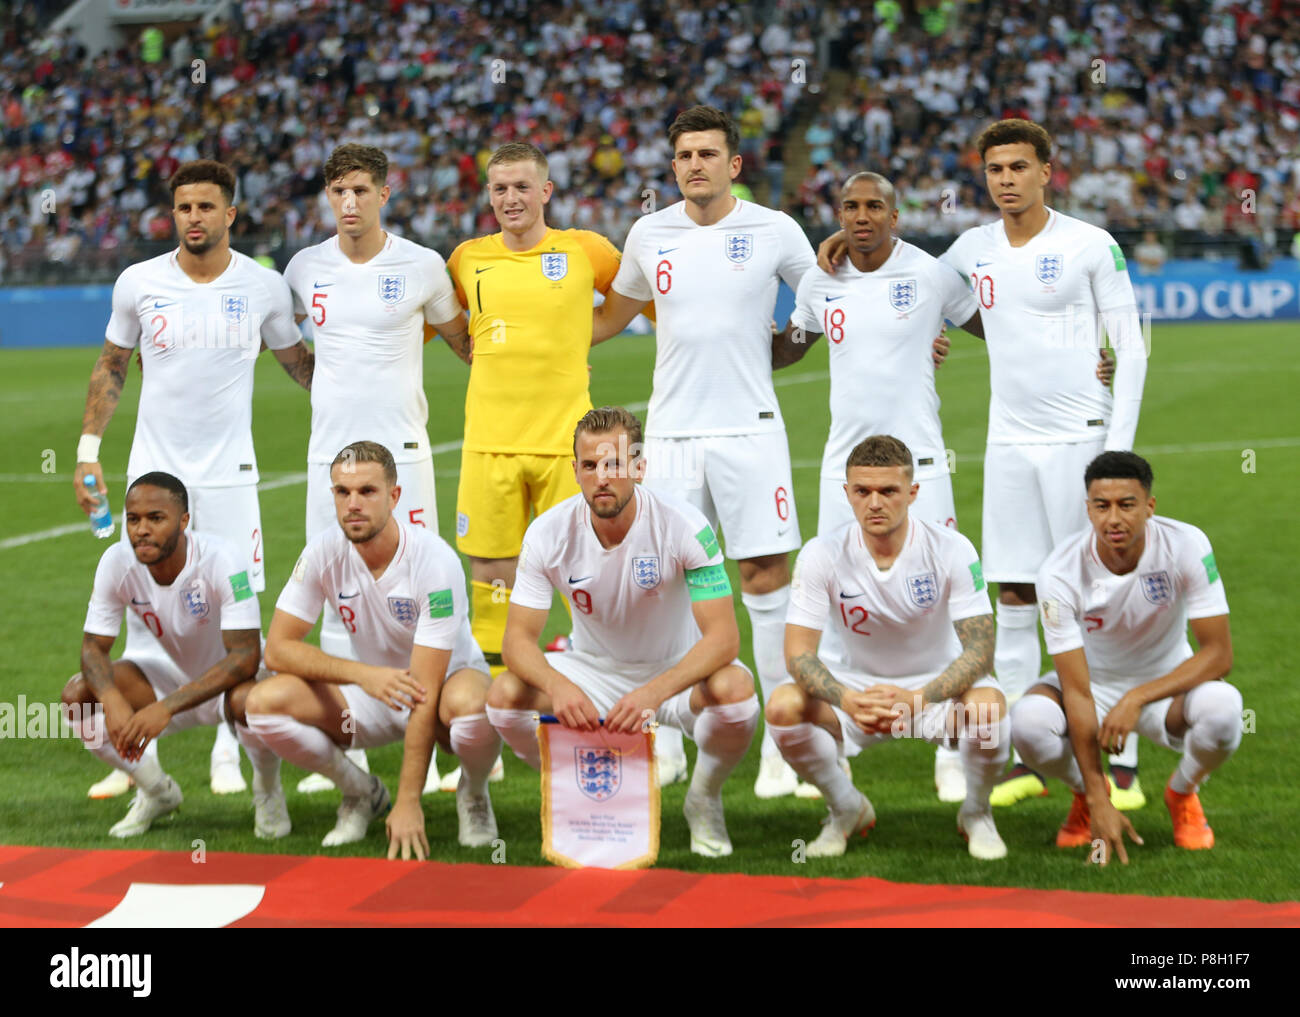 England team vs Croatia CROATIA V ENGLAND CROATIA V ENGLAND, 2018 FIFA WORLD CUP RUSSIA 11 July 2018 GBC9501 2018 FIFA World Cup Russia, Semi Final STRICTLY EDITORIAL USE ONLY. If The Player/Players Depicted In This Image Is/Are Playing For An English Club Or The England National Team. Then This Image May Only Be Used For Editorial Purposes. No Commercial Use. The Following Usages Are Also Restricted EVEN IF IN AN EDITORIAL CONTEXT: Use in conjuction with, or part of, any unauthorized audio, video, data, fixture lists, club/league logos, Betting, Games or any 'live' services. Stock Photo